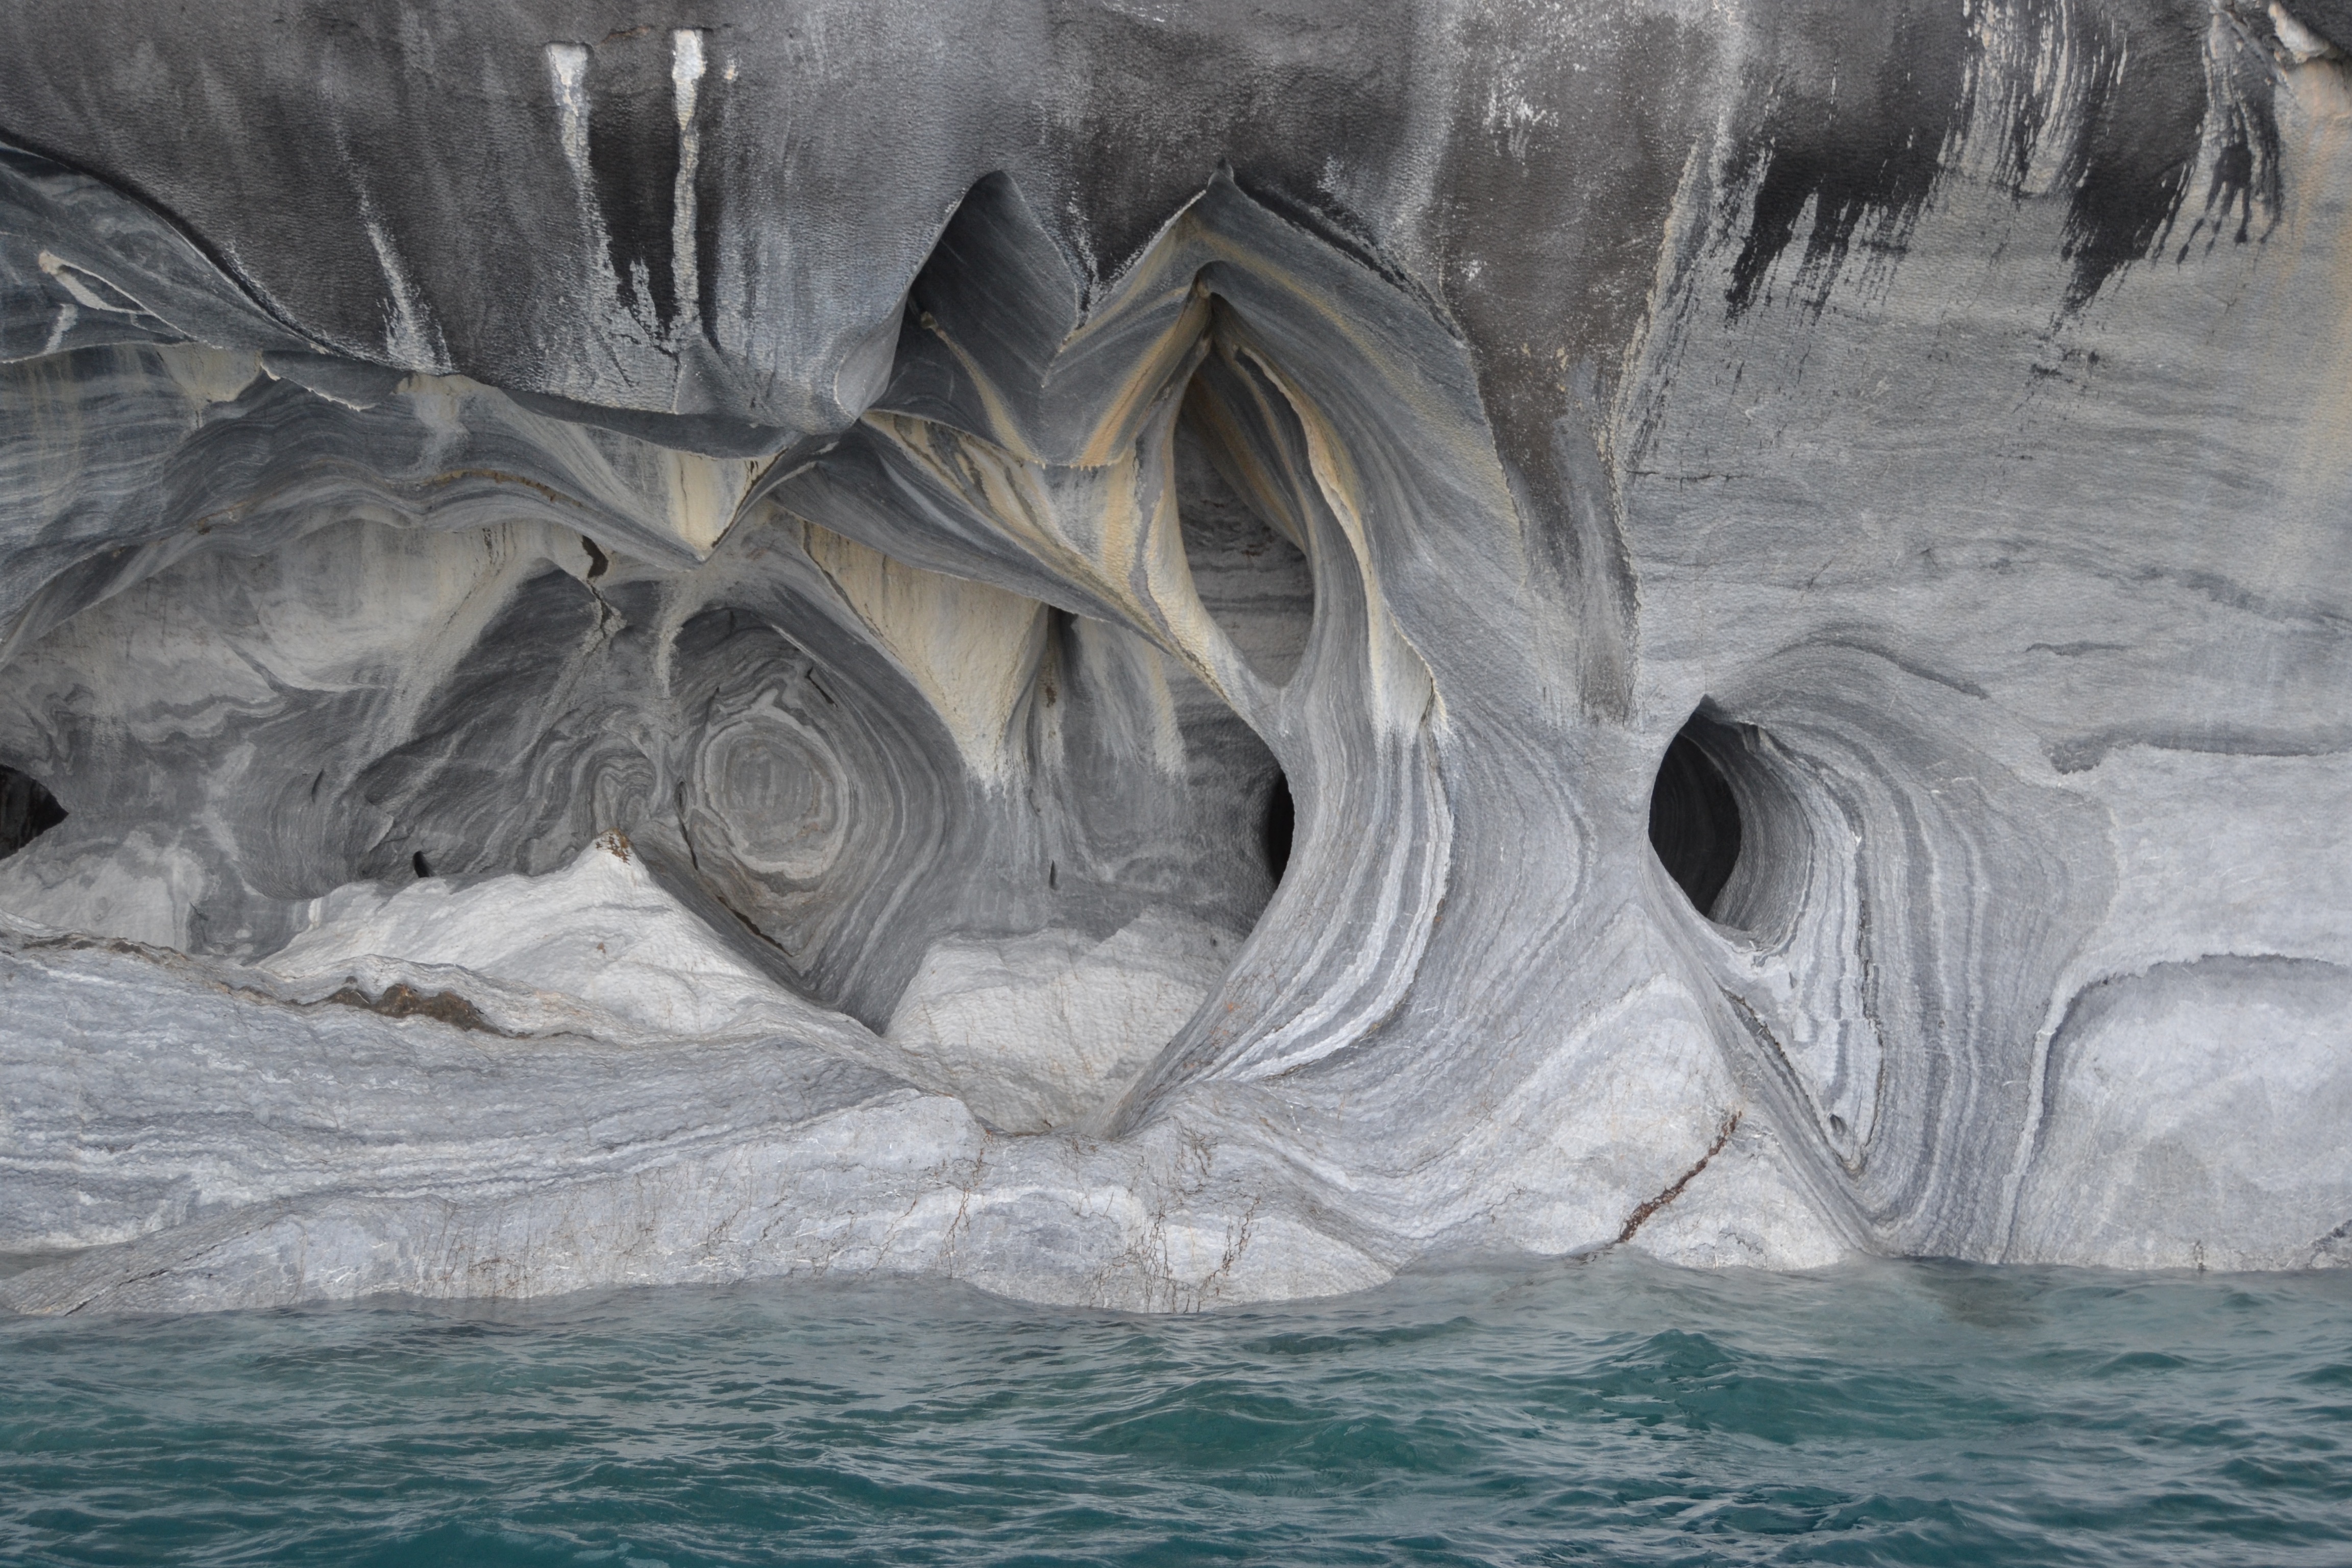 The marble caves are the result of the lake's erosion.